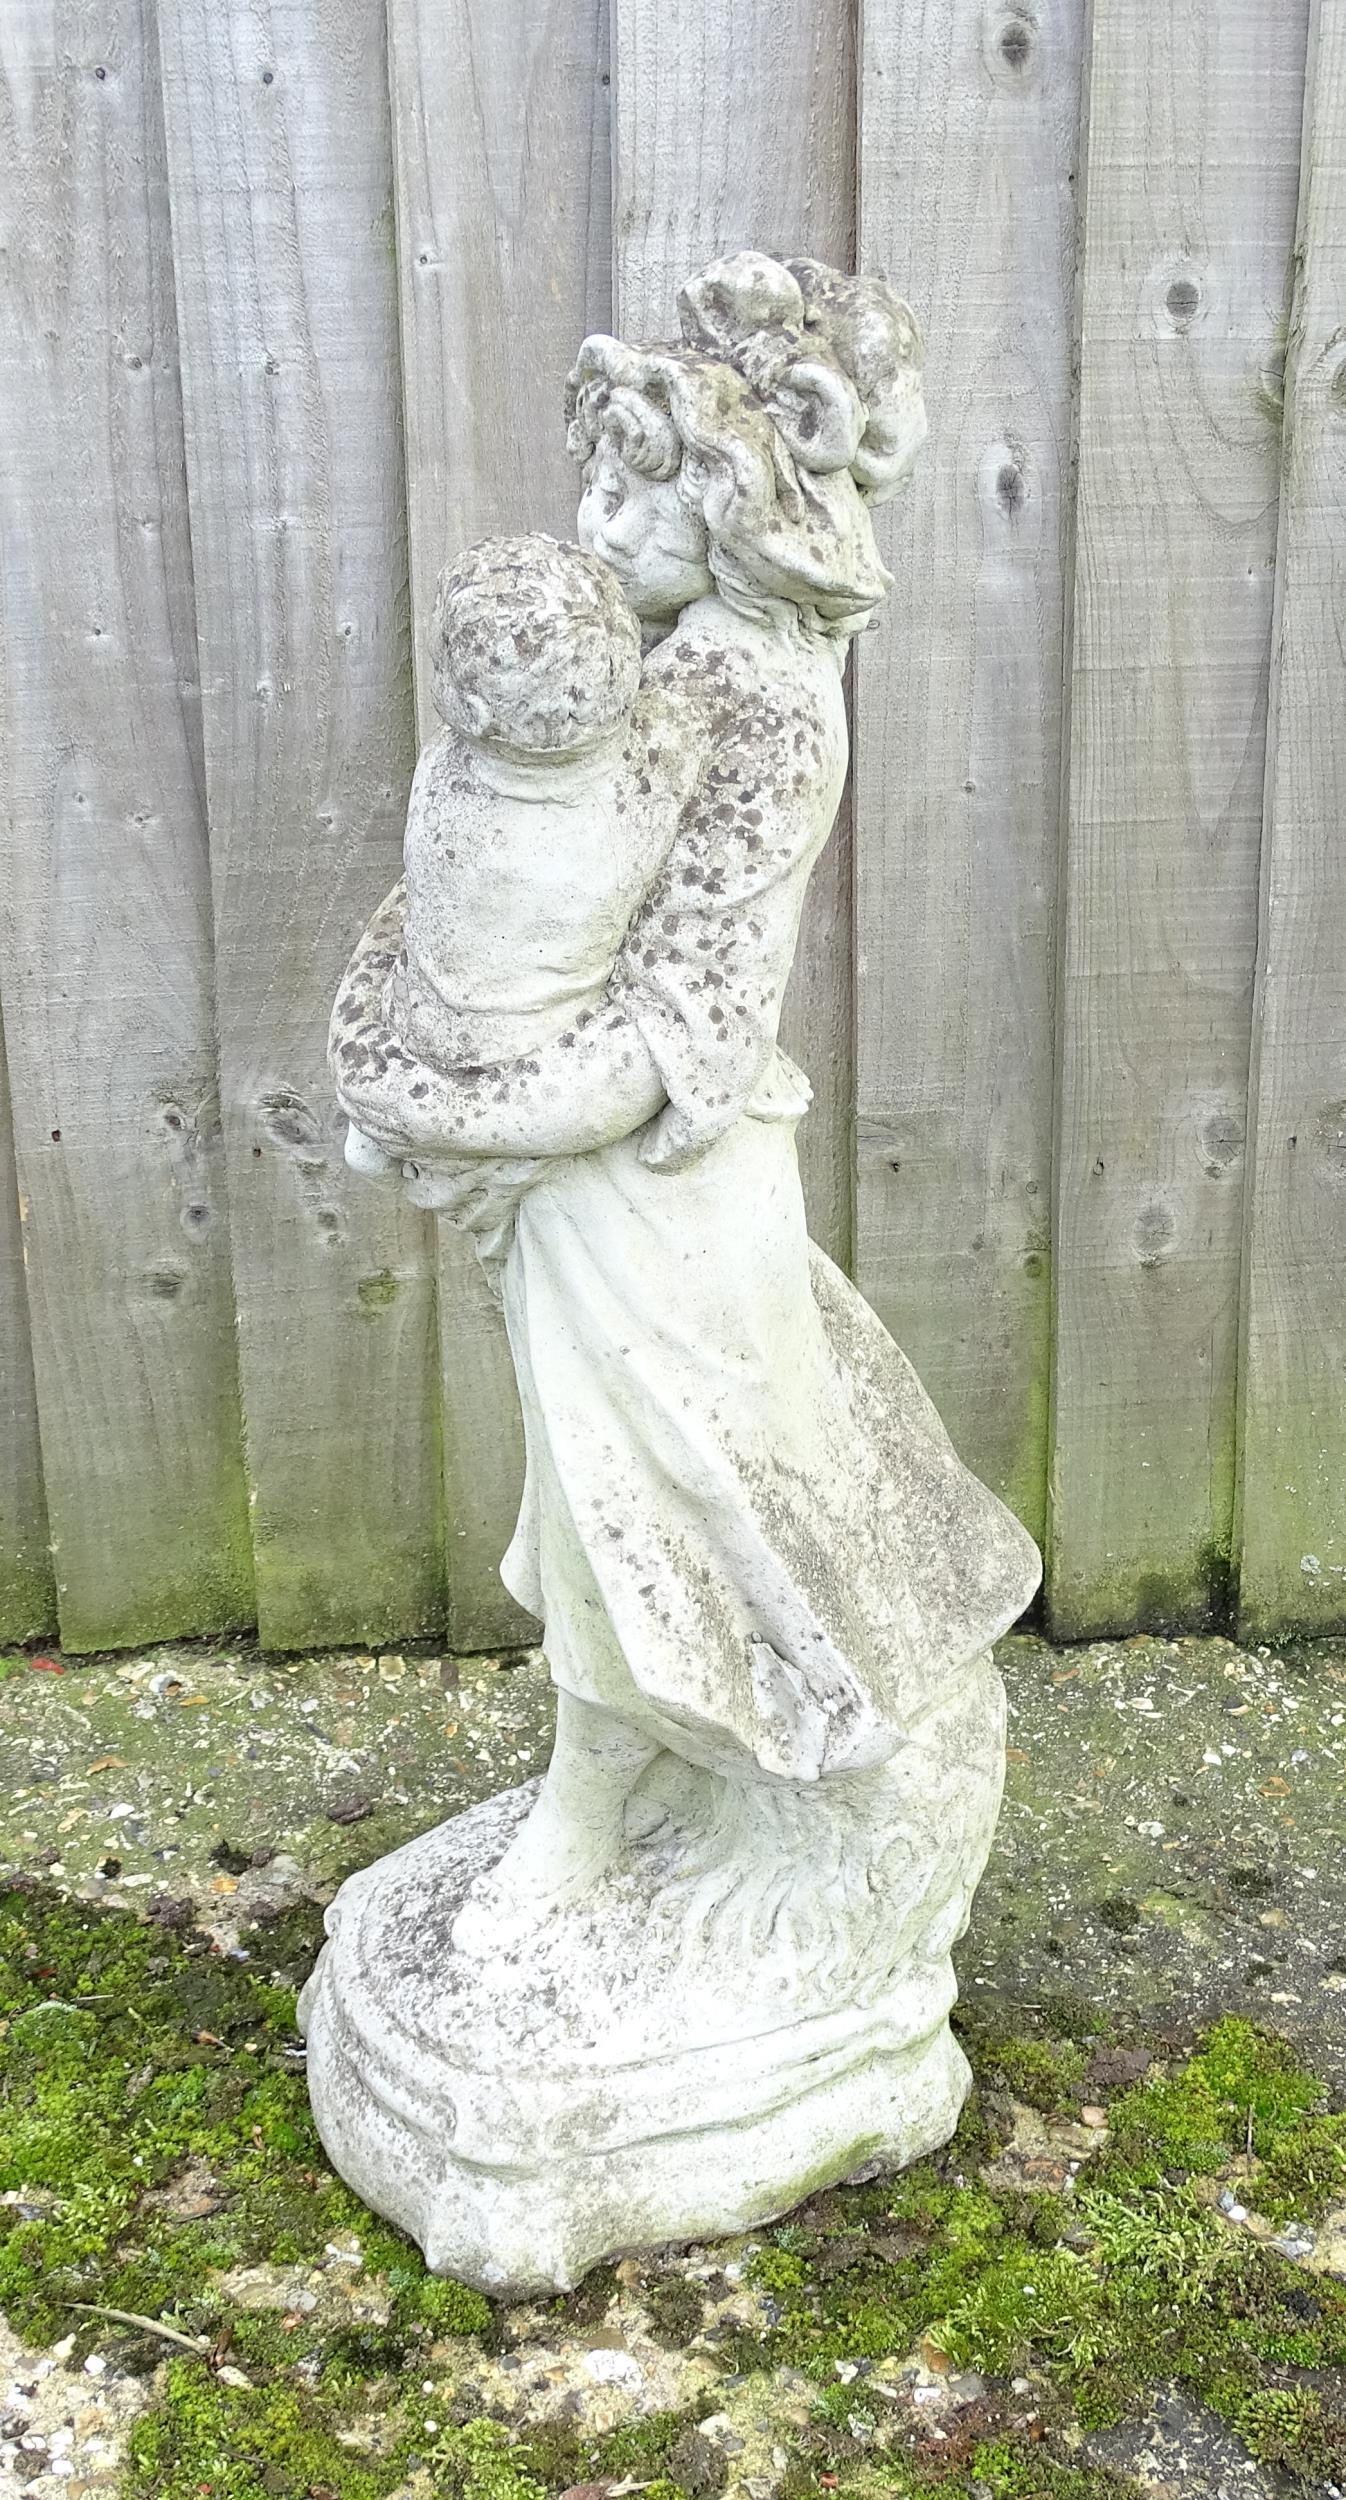 Garden & Architectural : a reconstituted stone statue formed as a mother and child, standing - Image 4 of 6